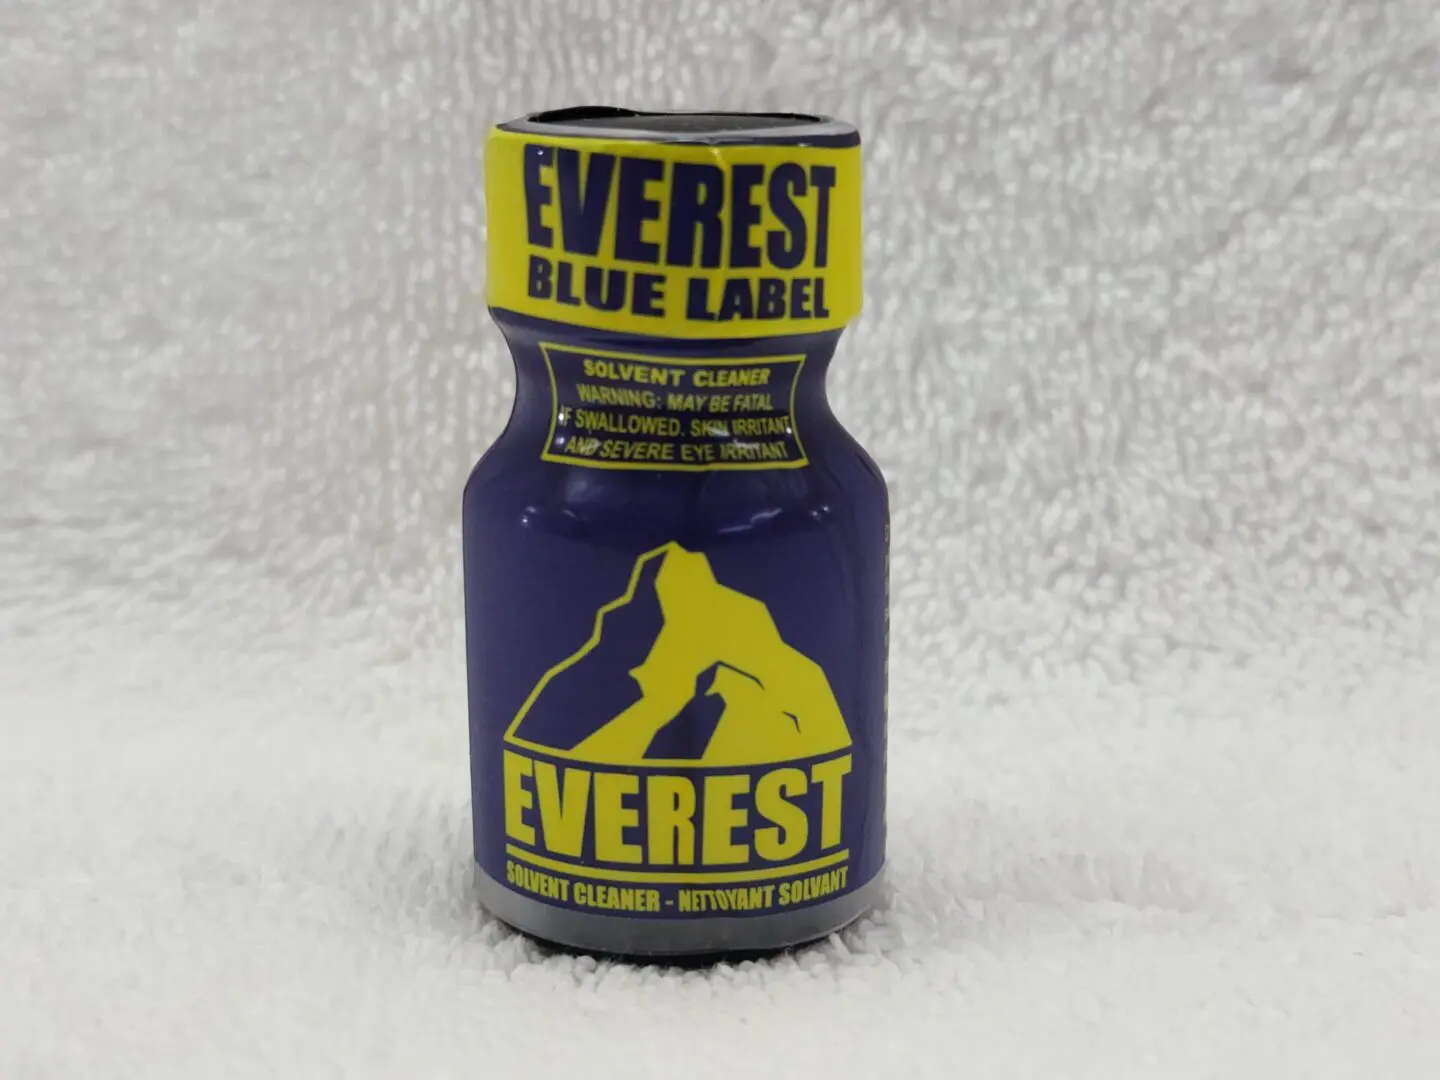 A bottle of everest blue label on a white background.